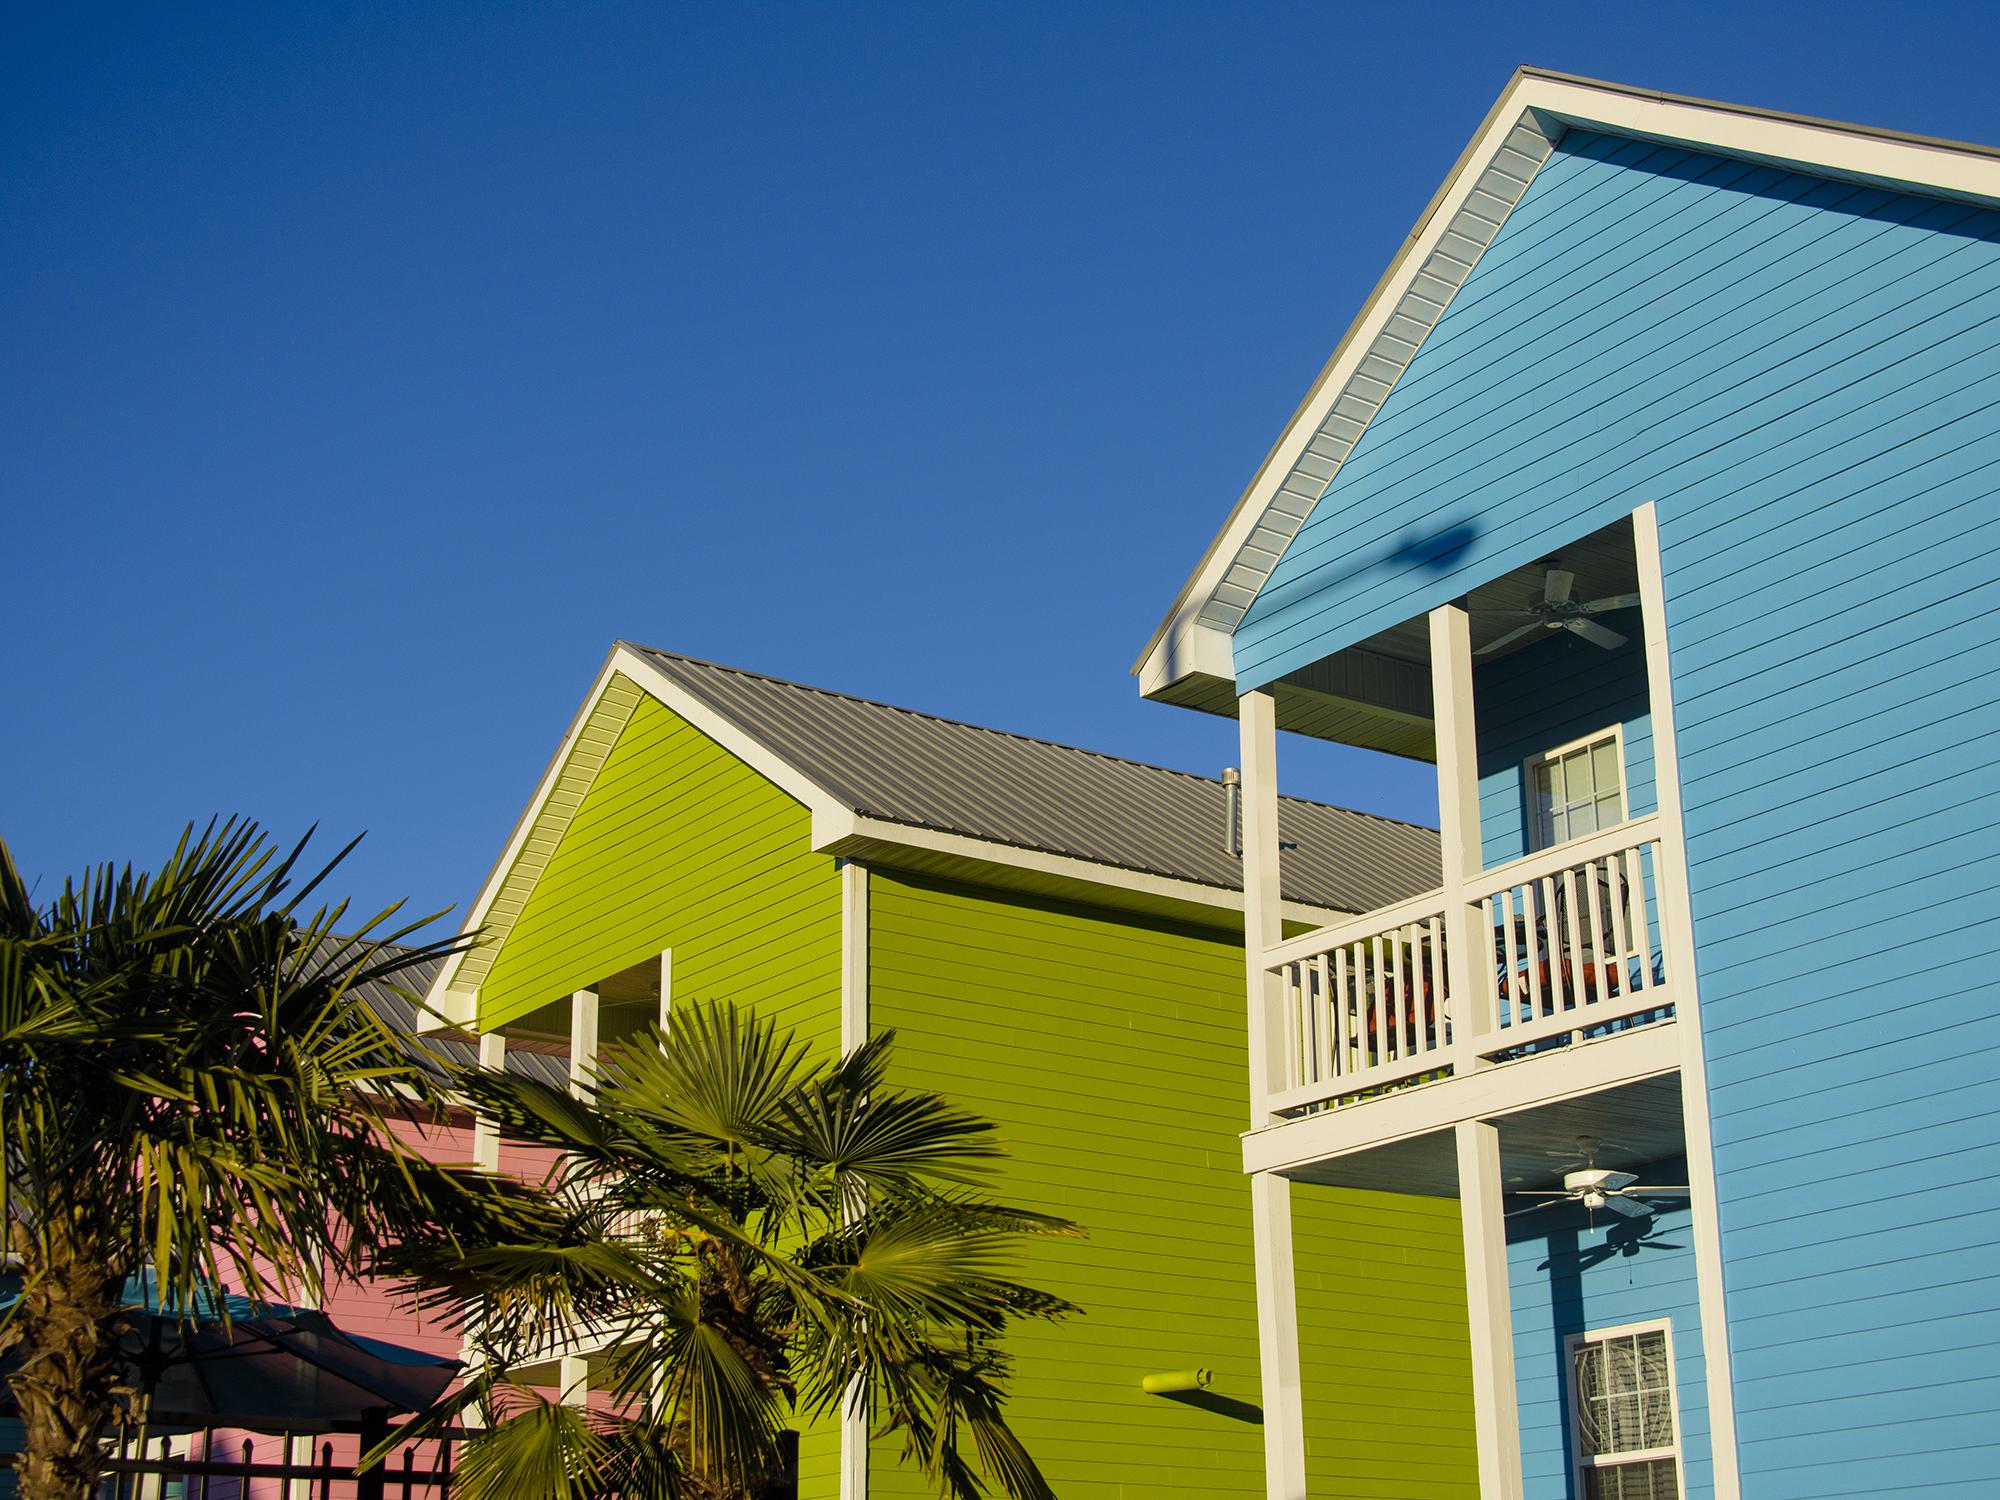 Palm trees adorn the landscape in front of blue, green and pink cottages.